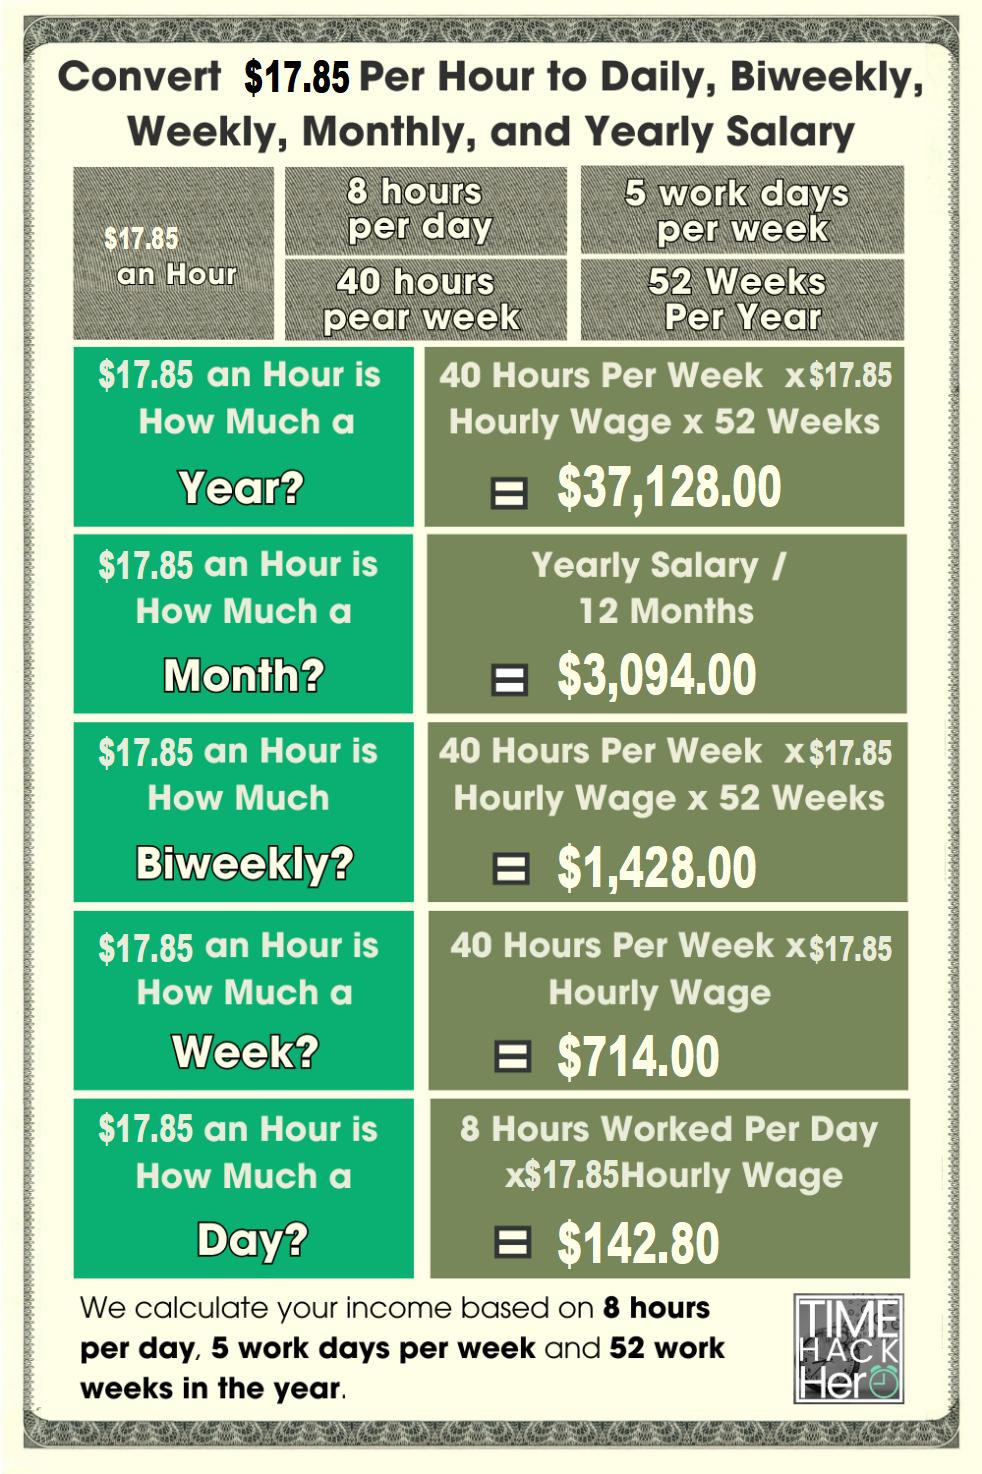 Convert $17.85 Per Hour to Weekly, Monthly, and Yearly Salary